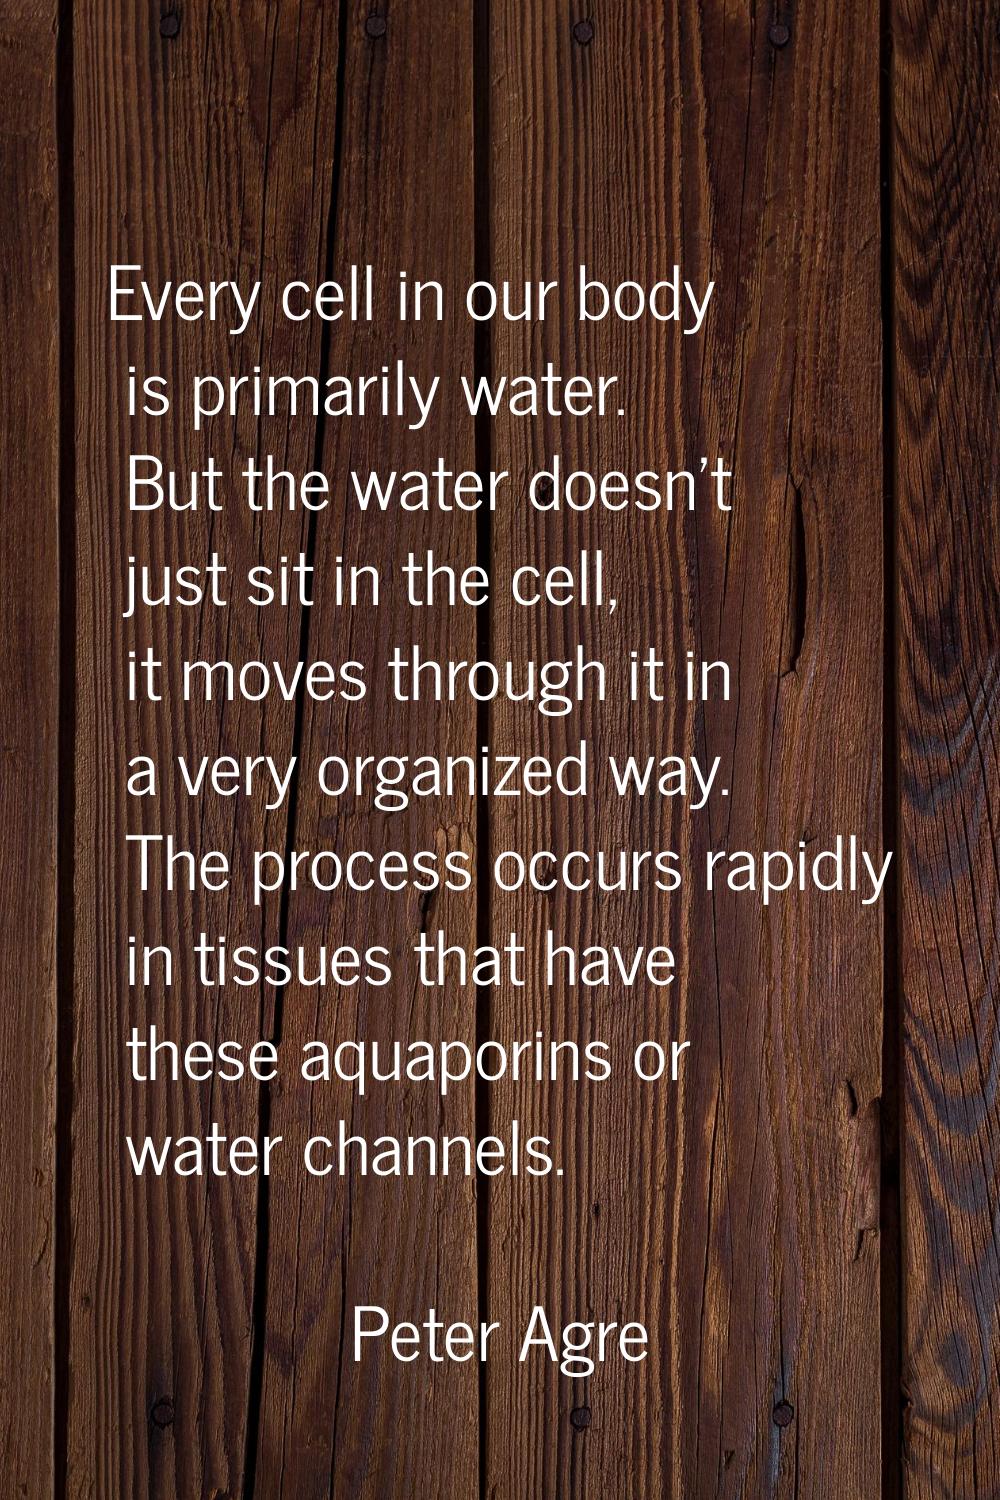 Every cell in our body is primarily water. But the water doesn't just sit in the cell, it moves thr